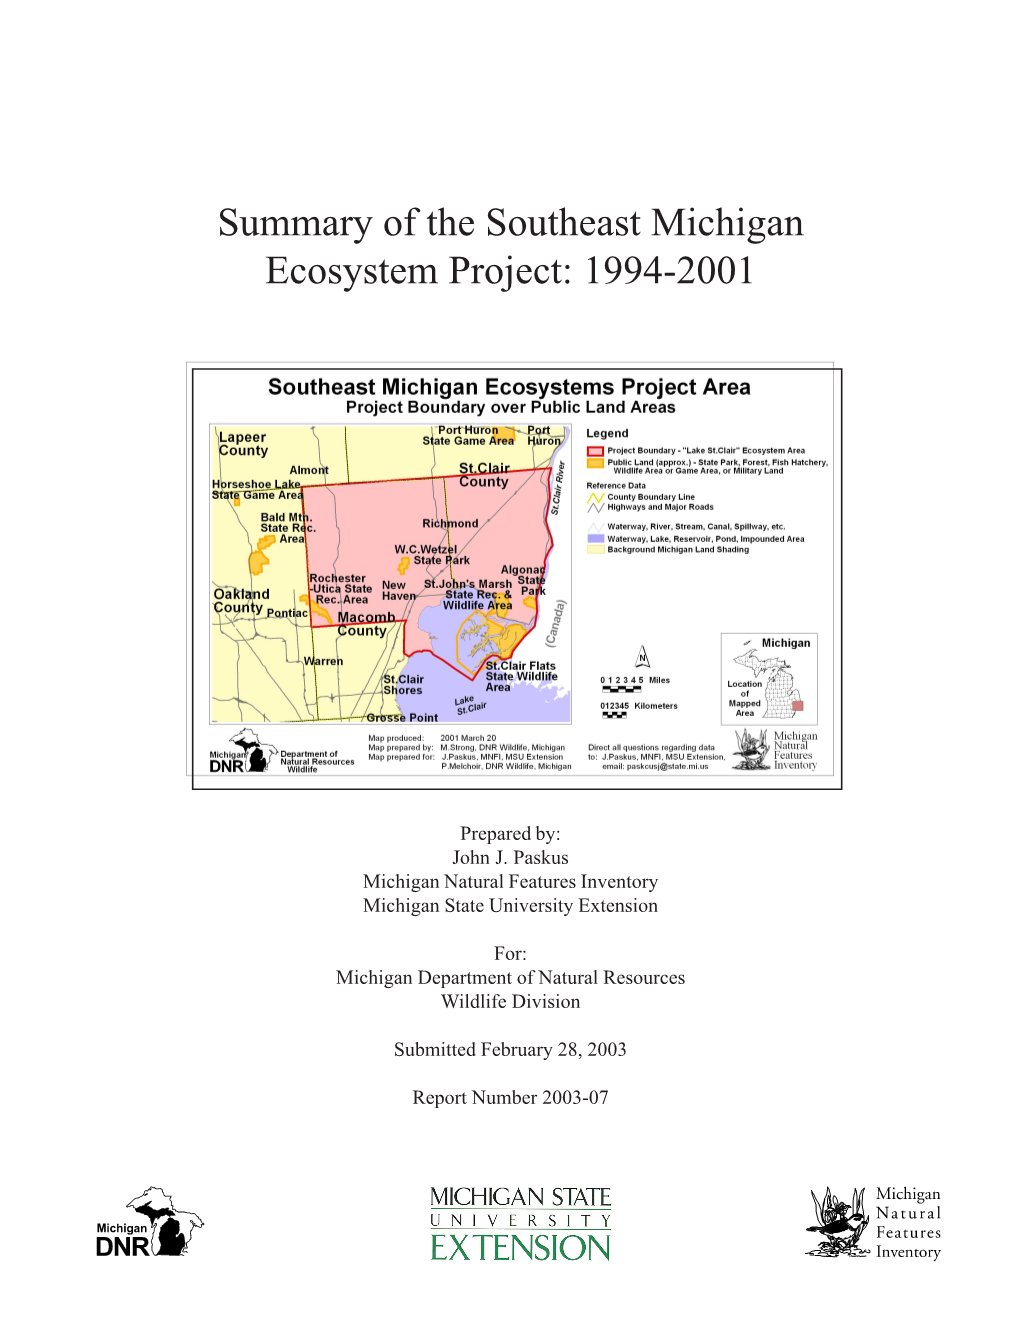 Summary of the Southeast Michigan Ecosystem Project: 1994-2001